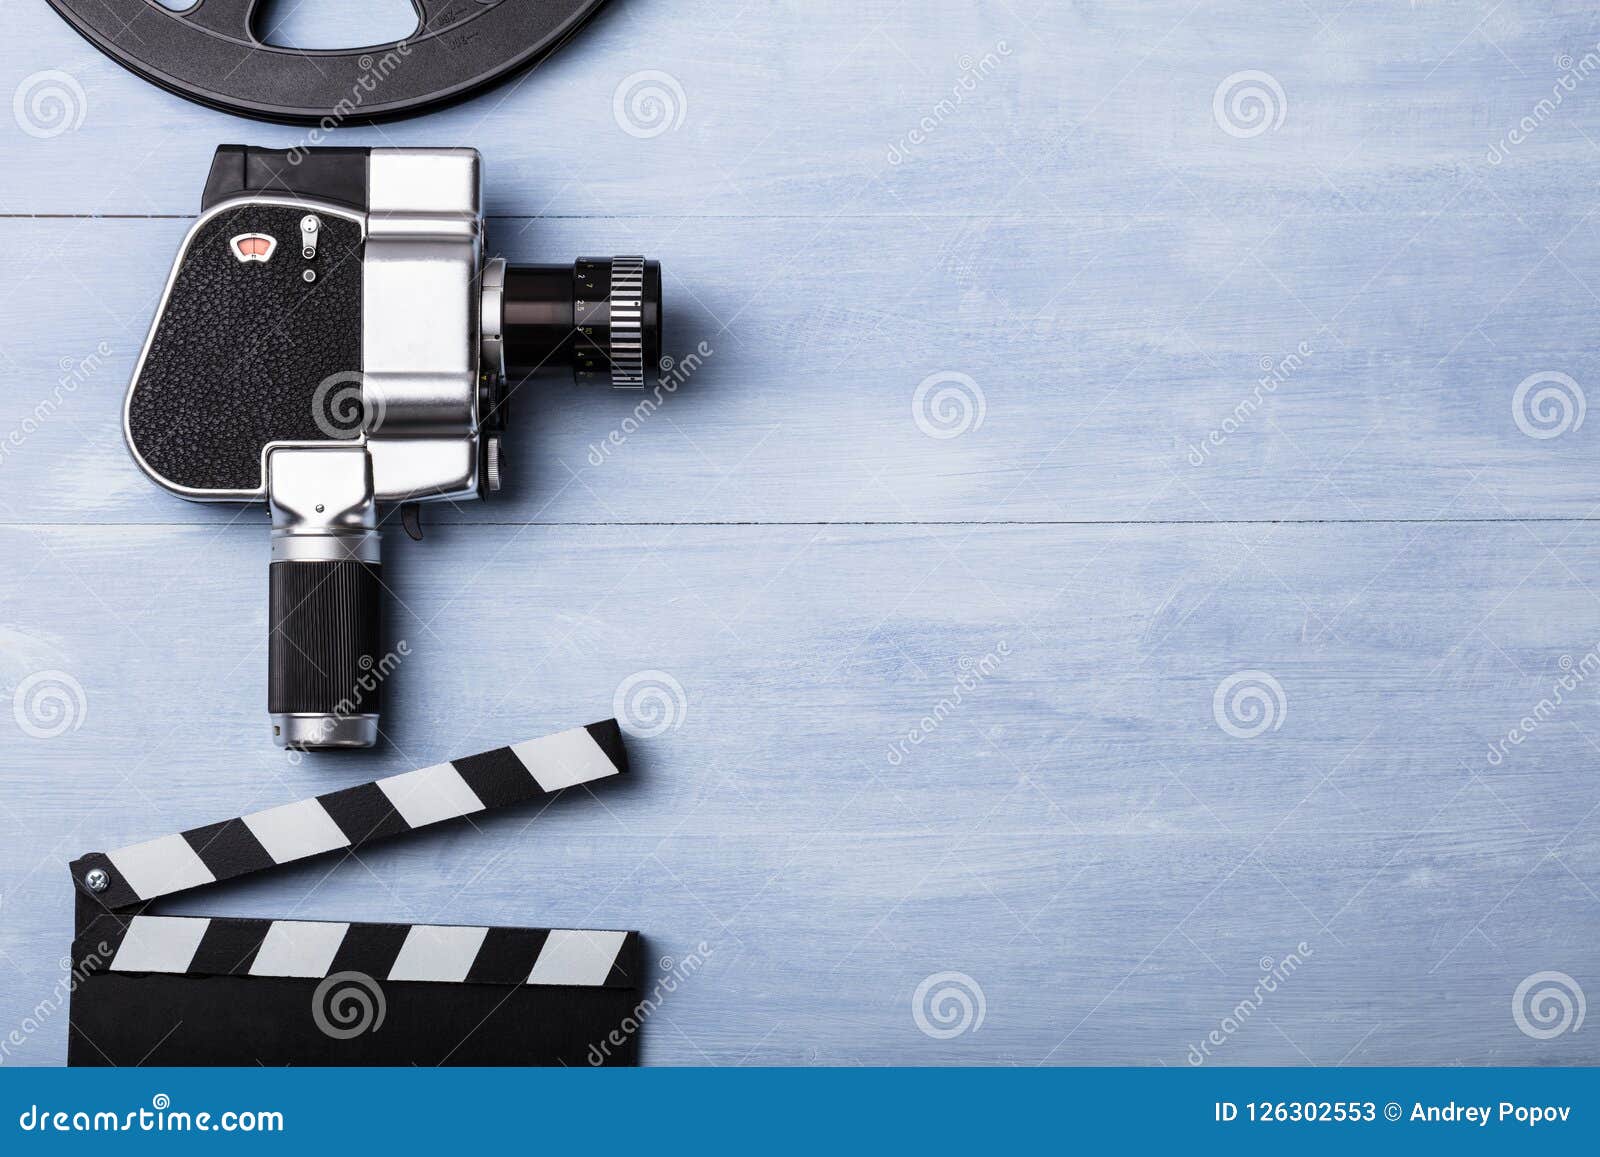 https://thumbs.dreamstime.com/z/movie-camera-film-reel-clapper-board-high-angle-view-movie-camera-film-reel-clapper-board-wooden-plank-126302553.jpg